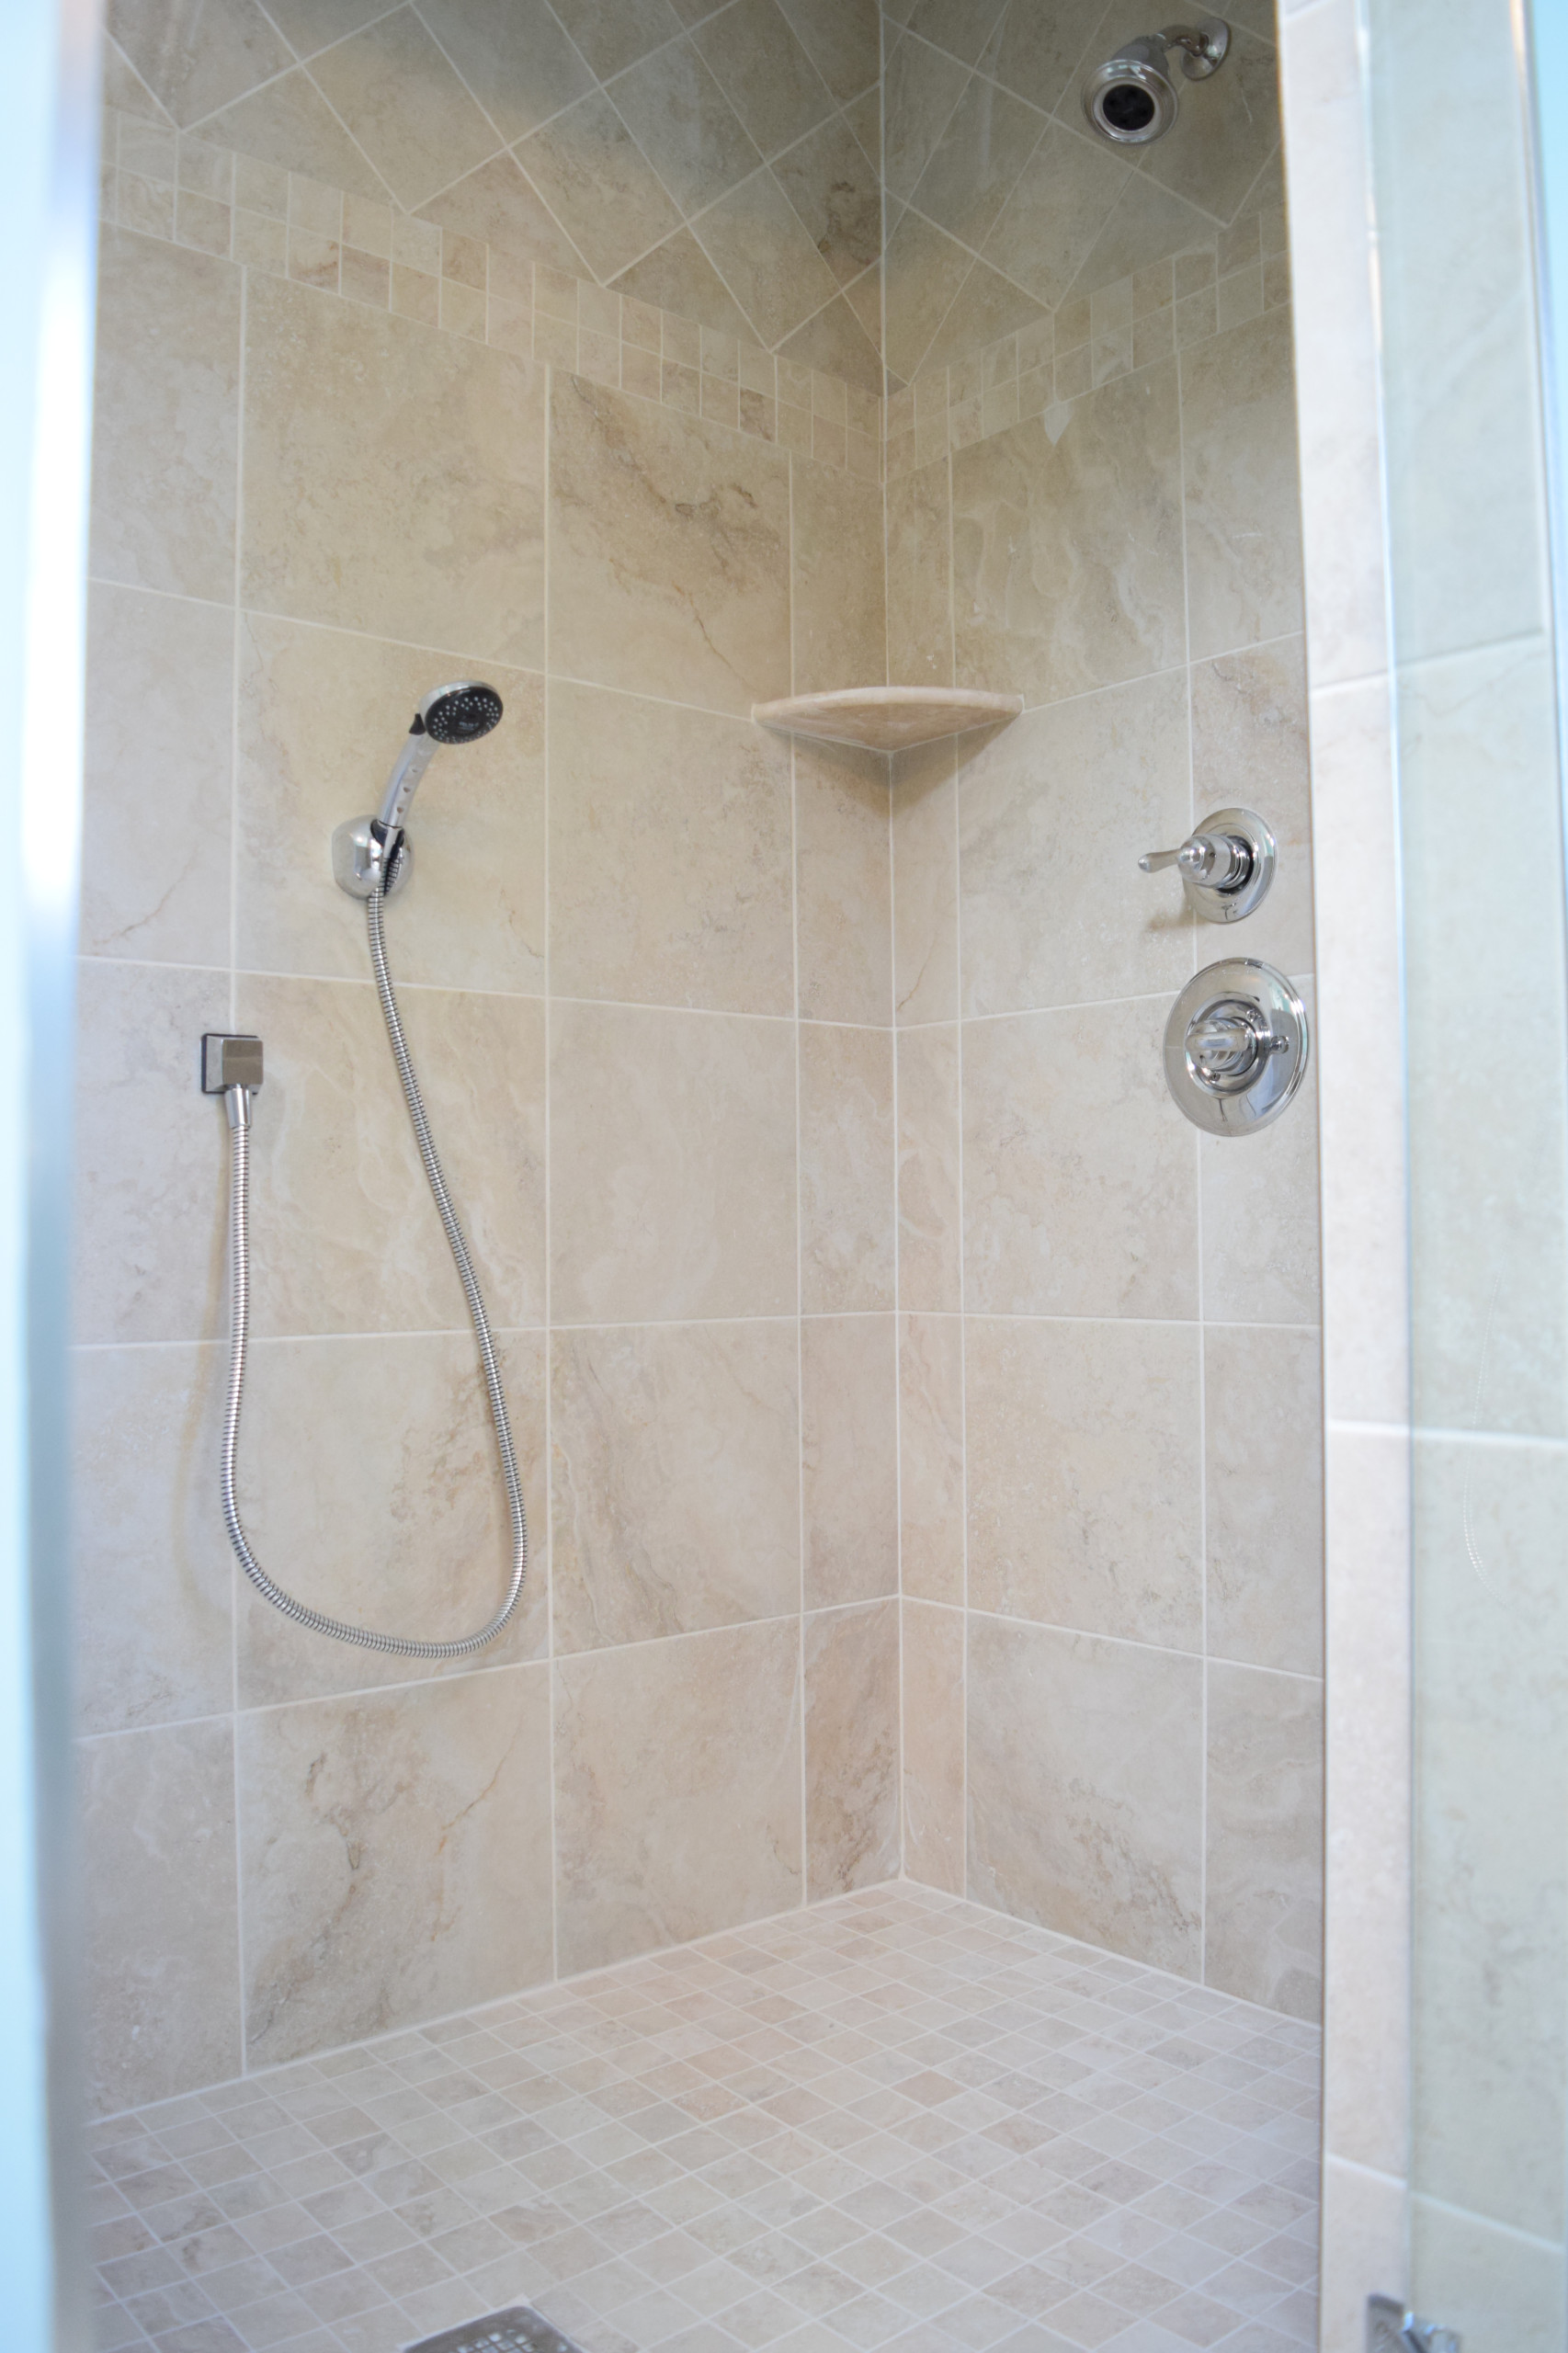 Walk in shower with spa like features.